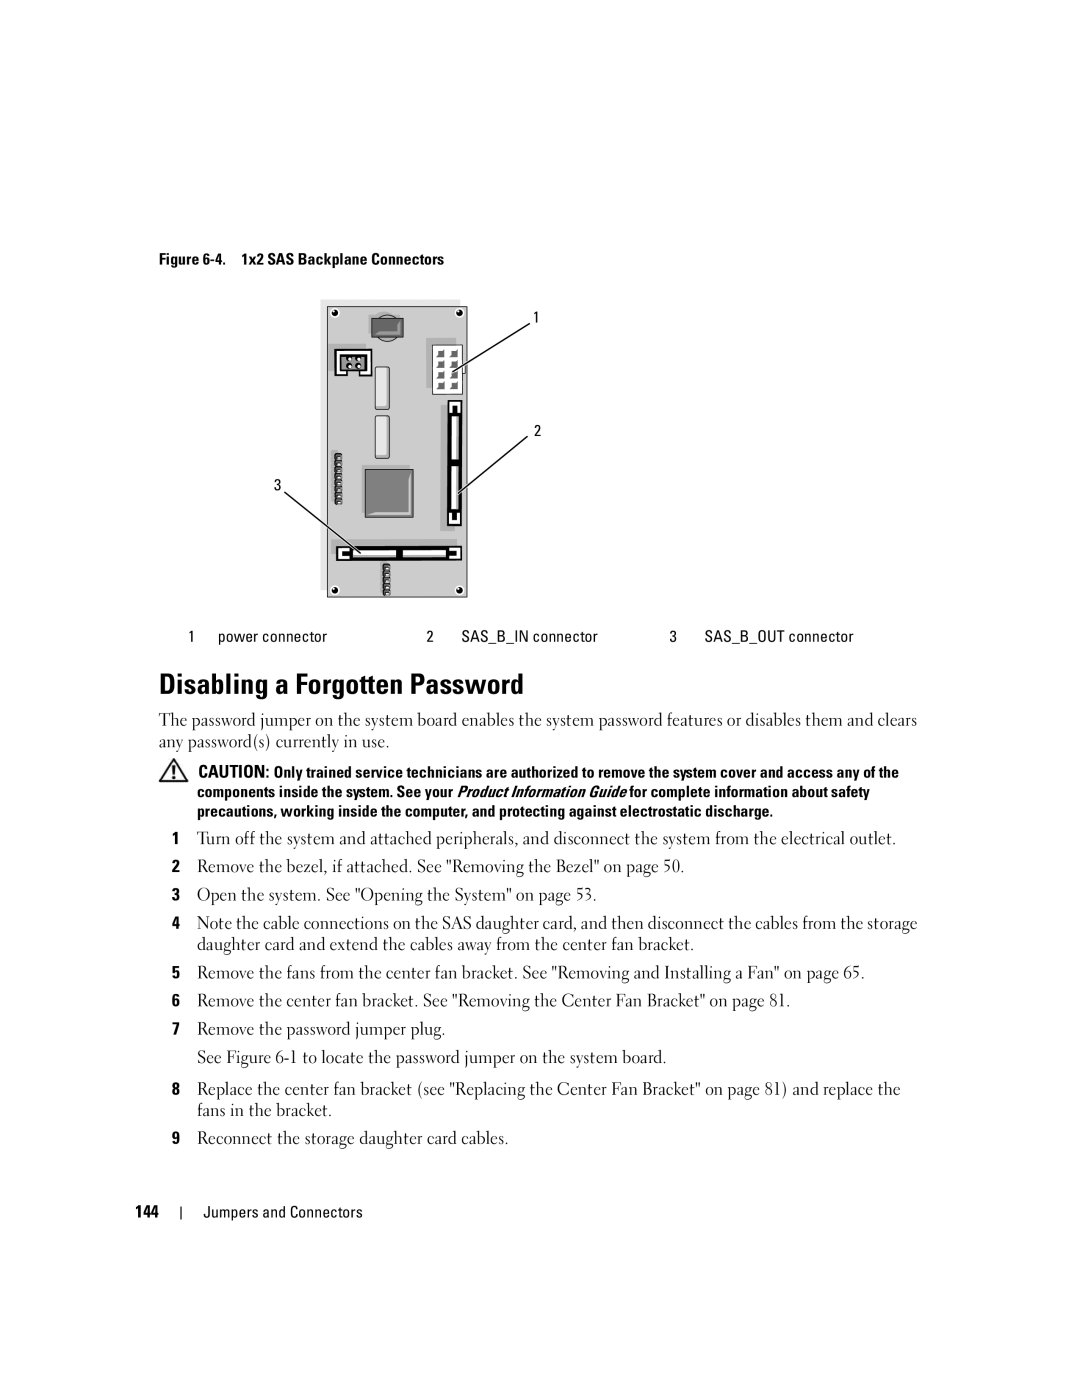 Dell 2900 owner manual Disabling a Forgotten Password, SASBOUT connector 